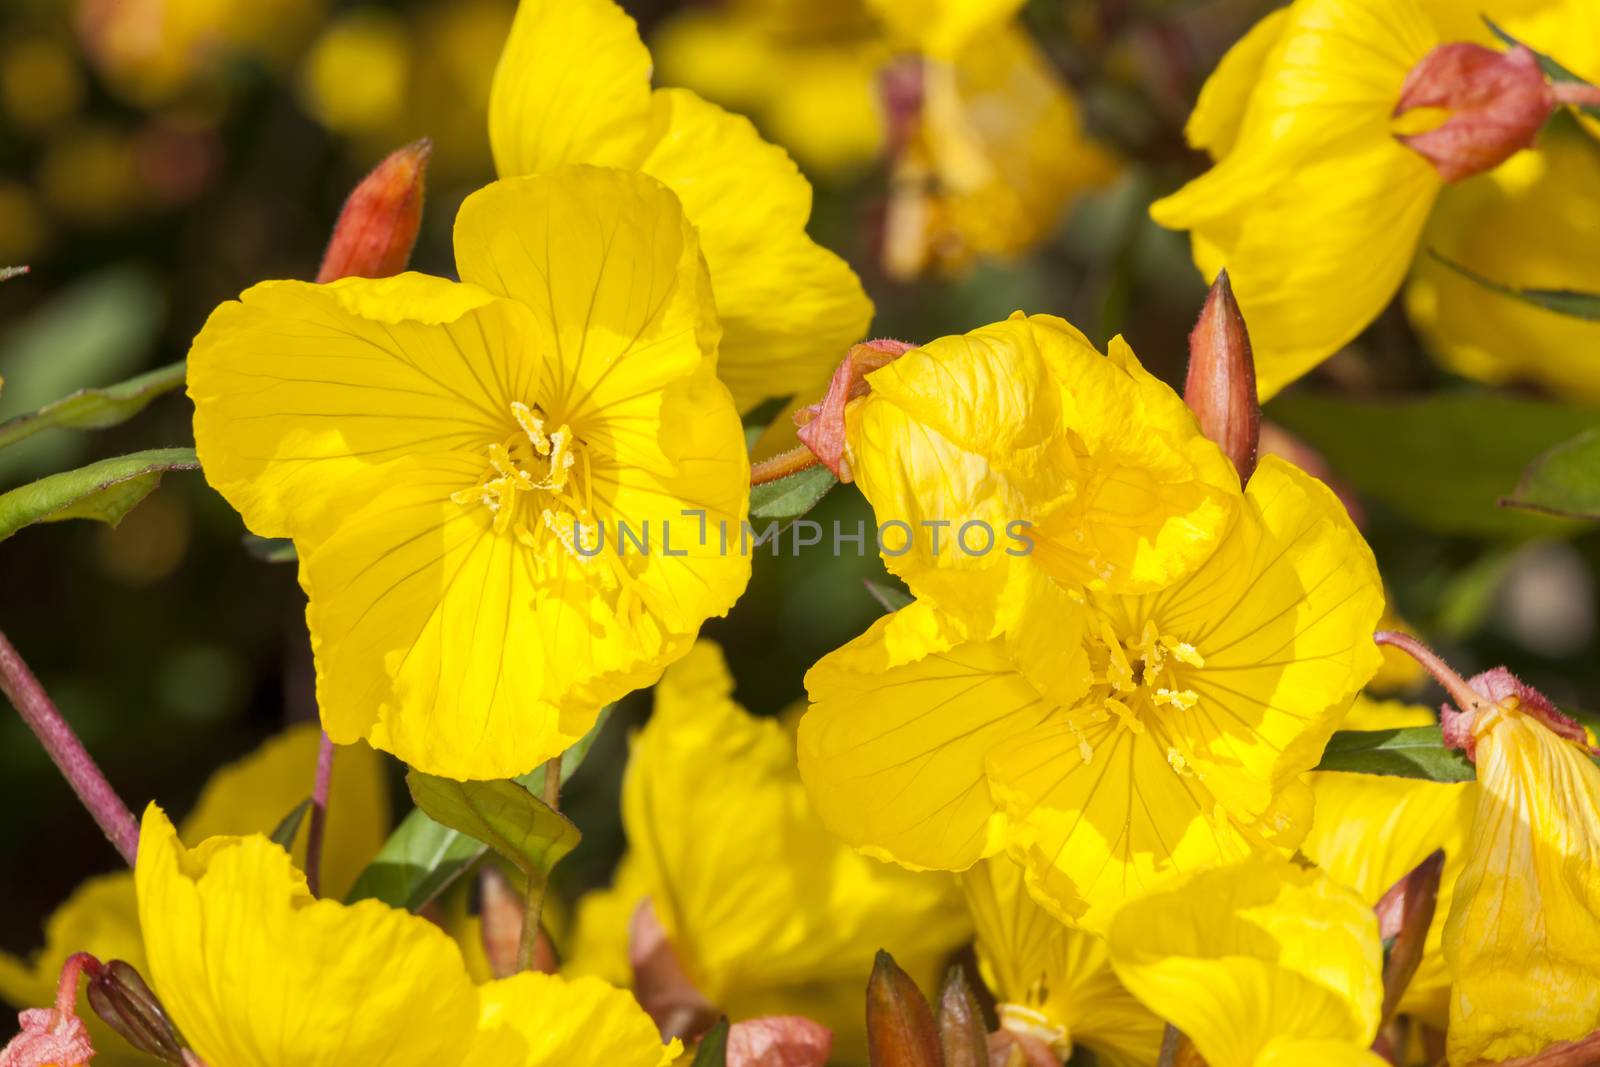 Oenothera 'Crown Imperial' a yellow herbaceous springtime summer flower plant commonly known as evening primrose